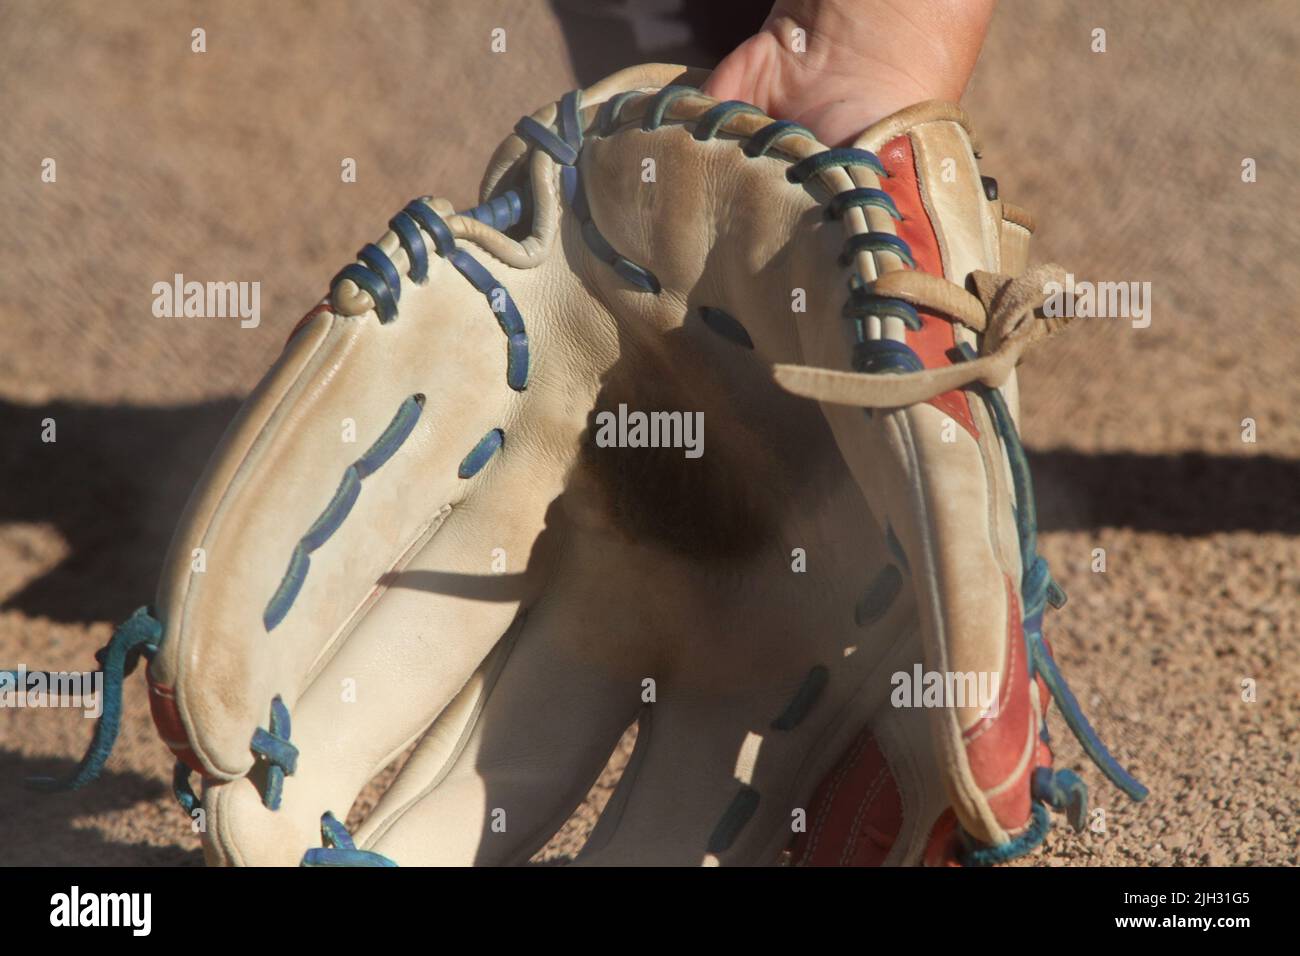 Closeup of a softball player's glove ready to field a ground ball. Stock Photo